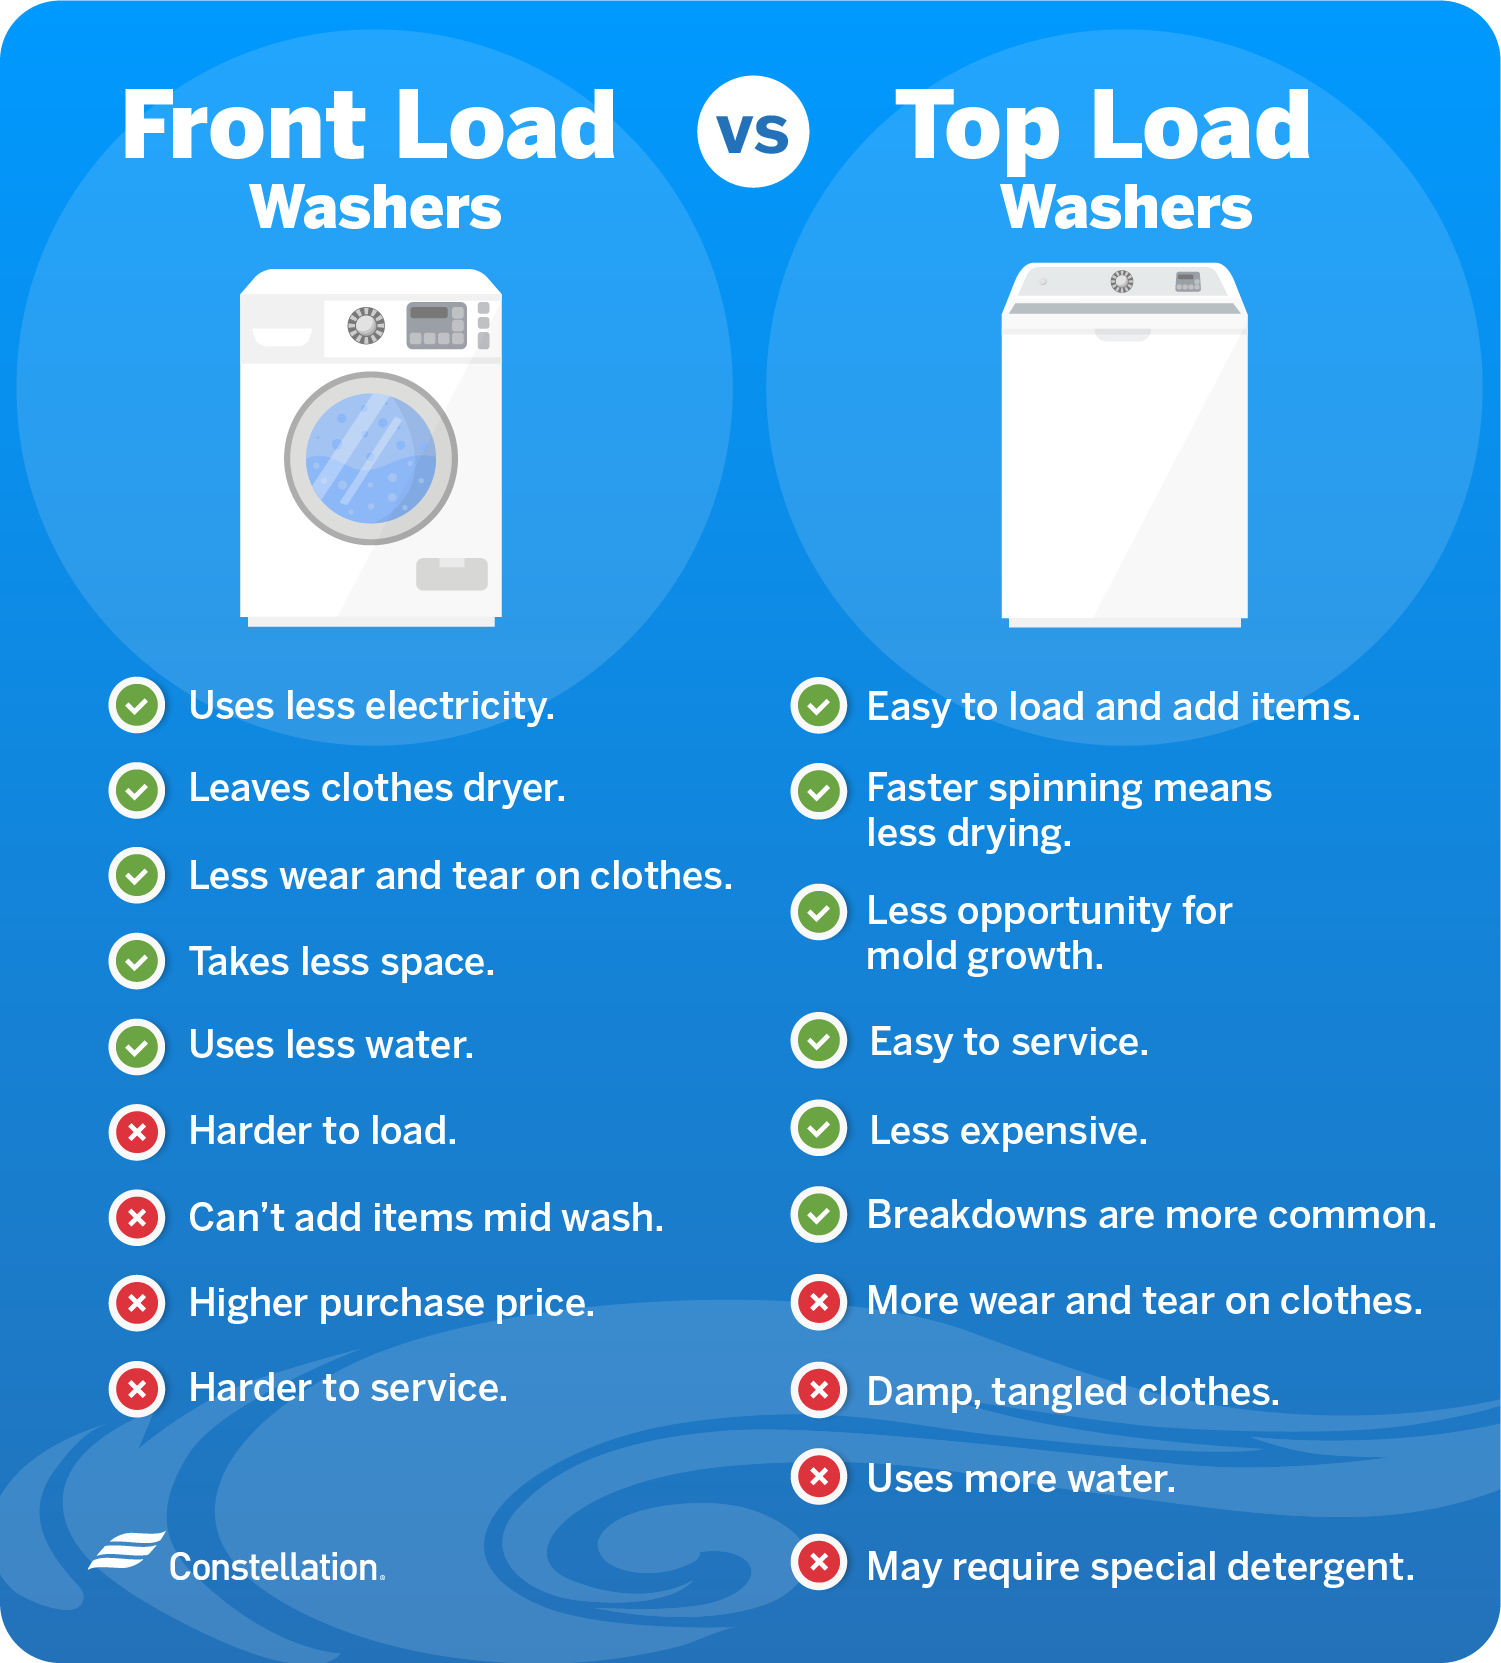 Front load vs top load washers comparison.